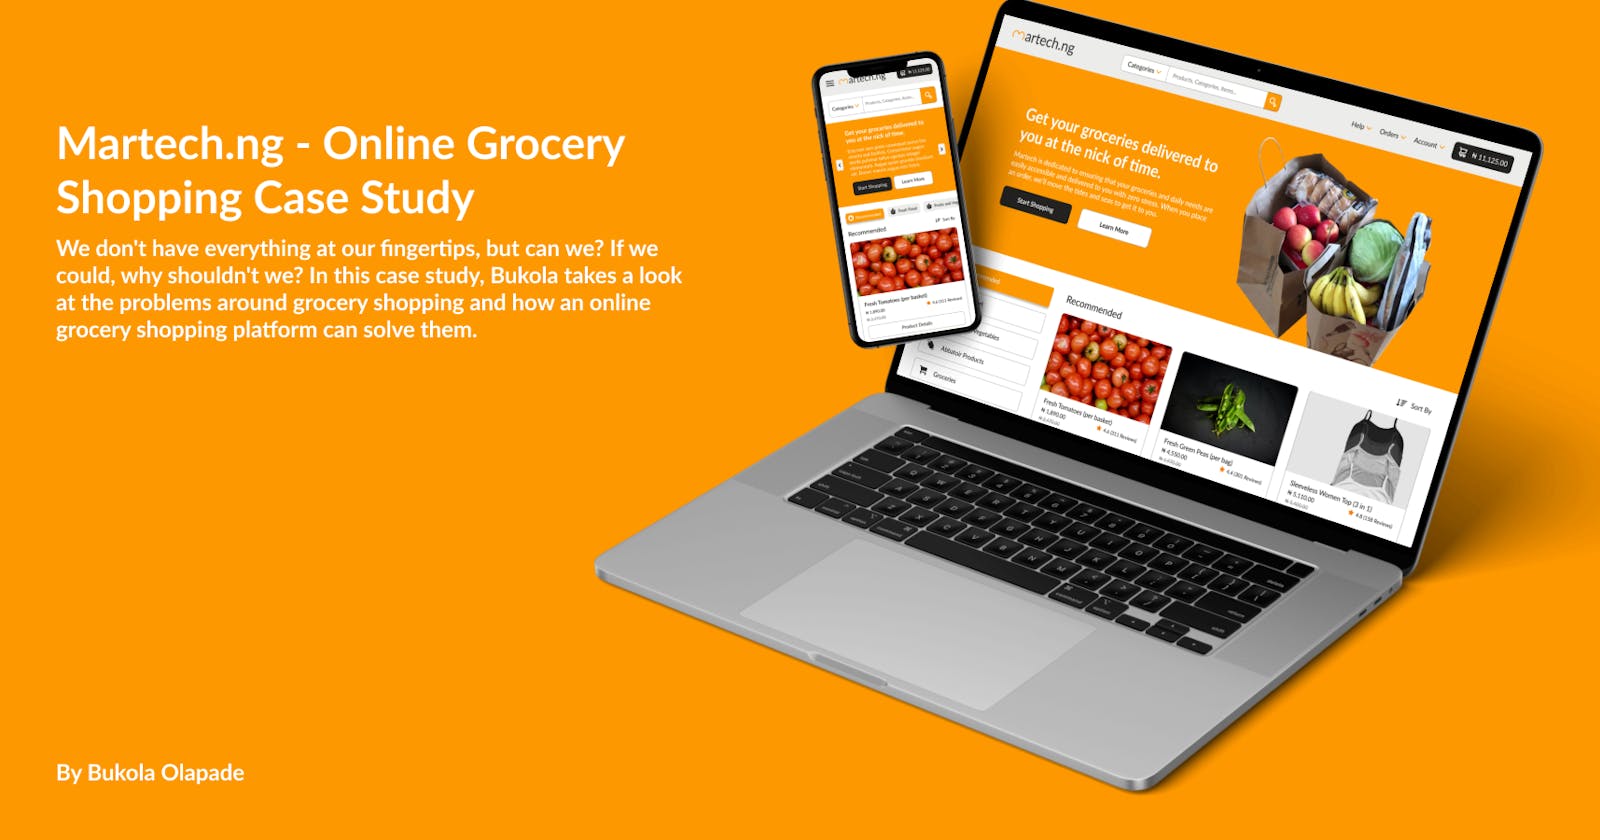 Martech.ng - Online Grocery Shopping Case Study